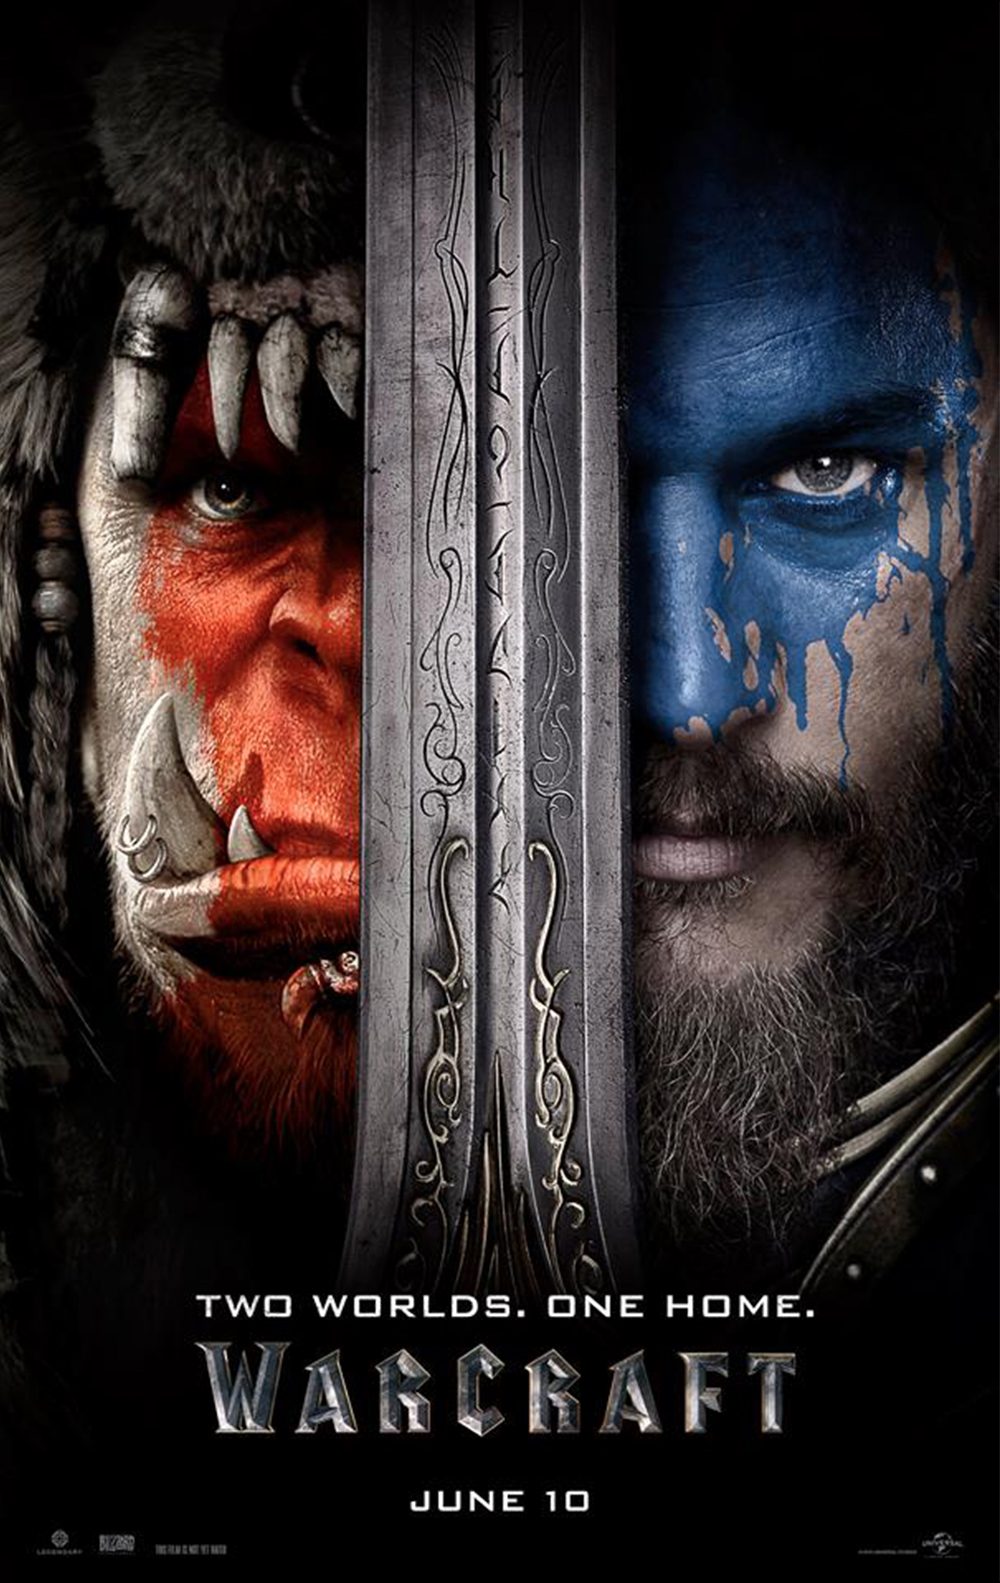 Warcraft Poster. In Theaters Now